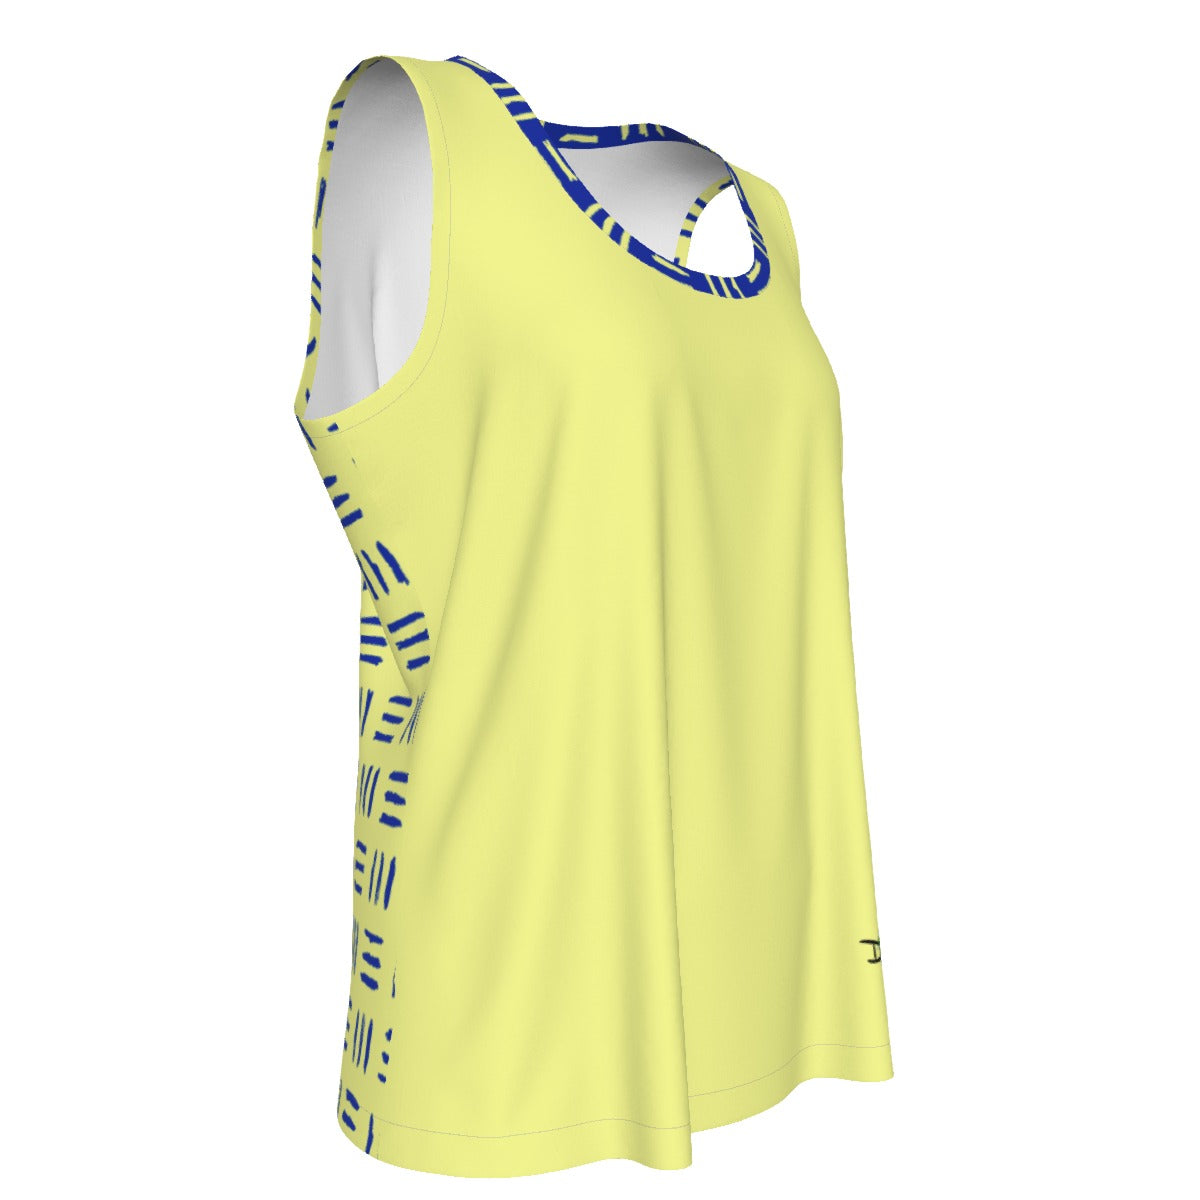 Dizzy Pickle Coming Up Daisies YB Weave Women's Pickleball Sleeveless Sports Tank Top Canary Yellow